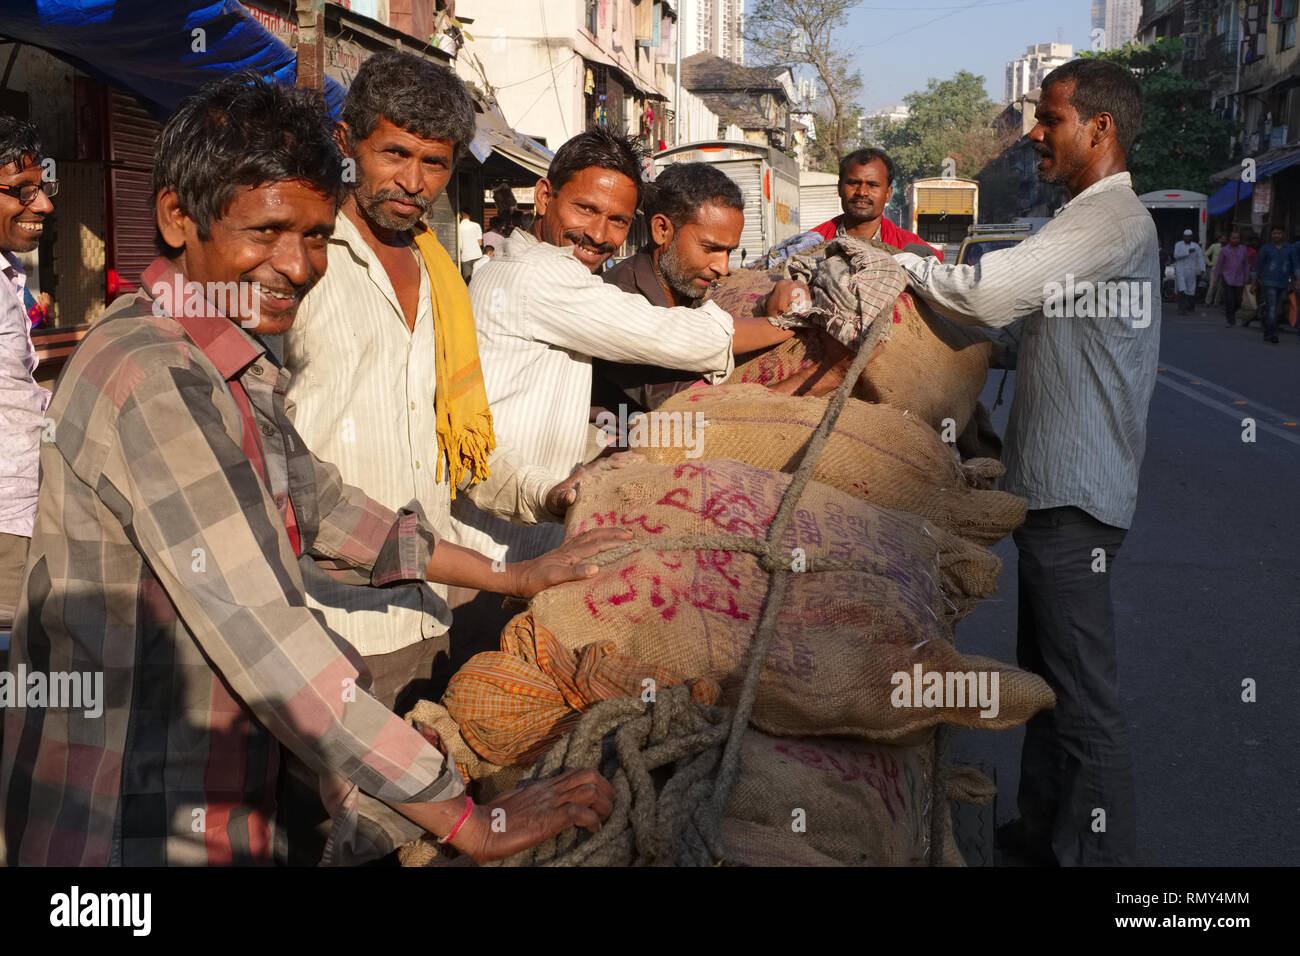 Handcart pullers, migrants from Uttar Pradesh in Northern India, pushing and pulling a two ton load of metal; seen in Khetwadi area, Mumbai, India Stock Photo